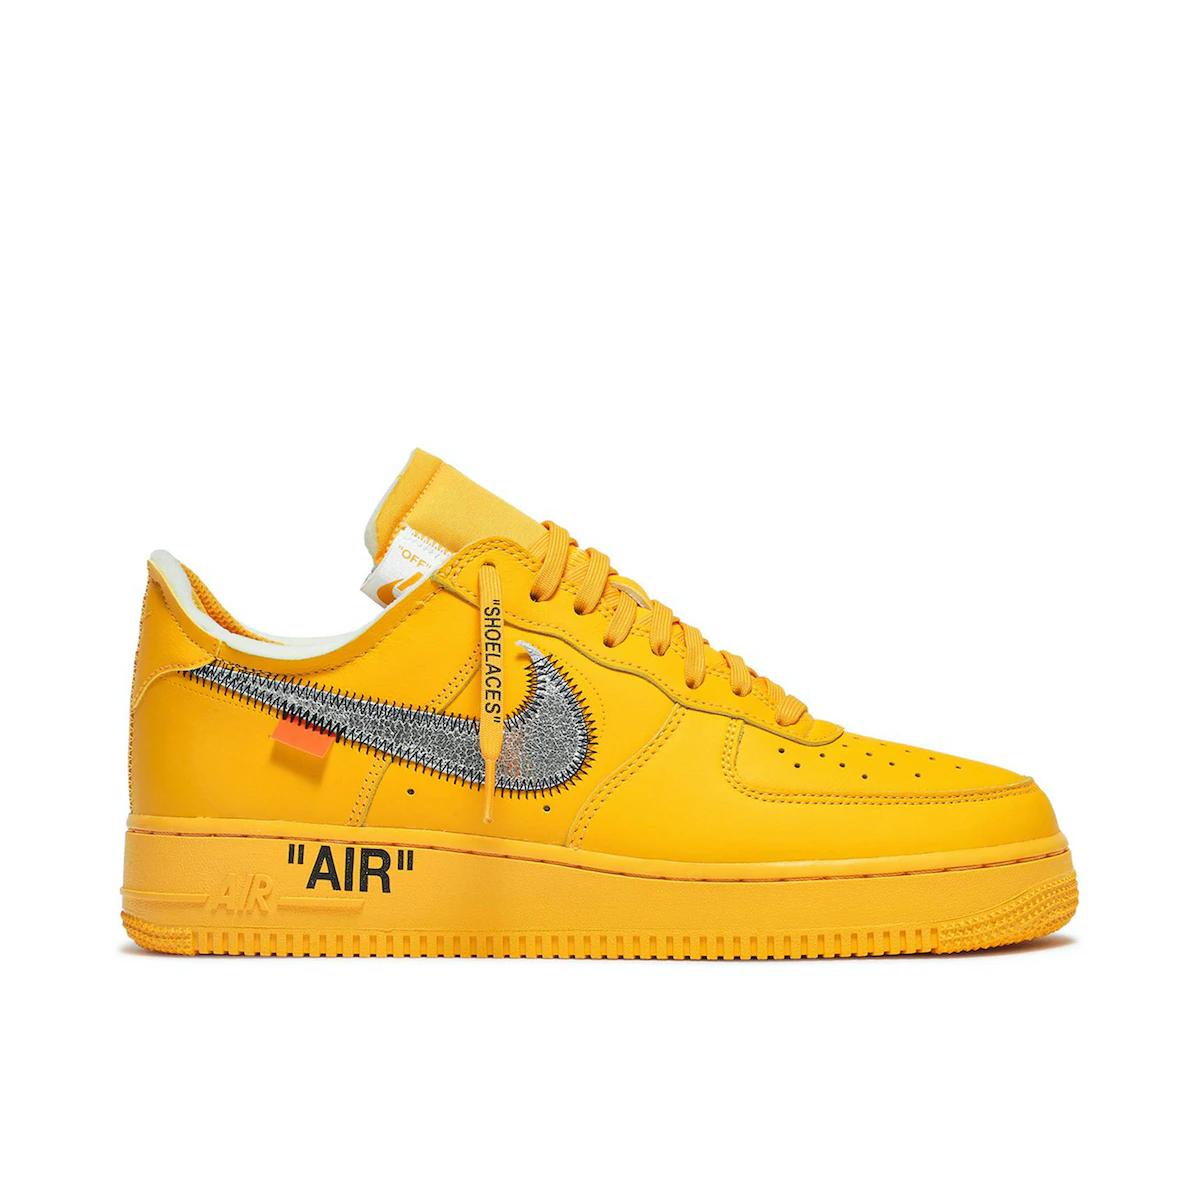 AF1 Low OFF-WHITE University Gold Metallic Silver